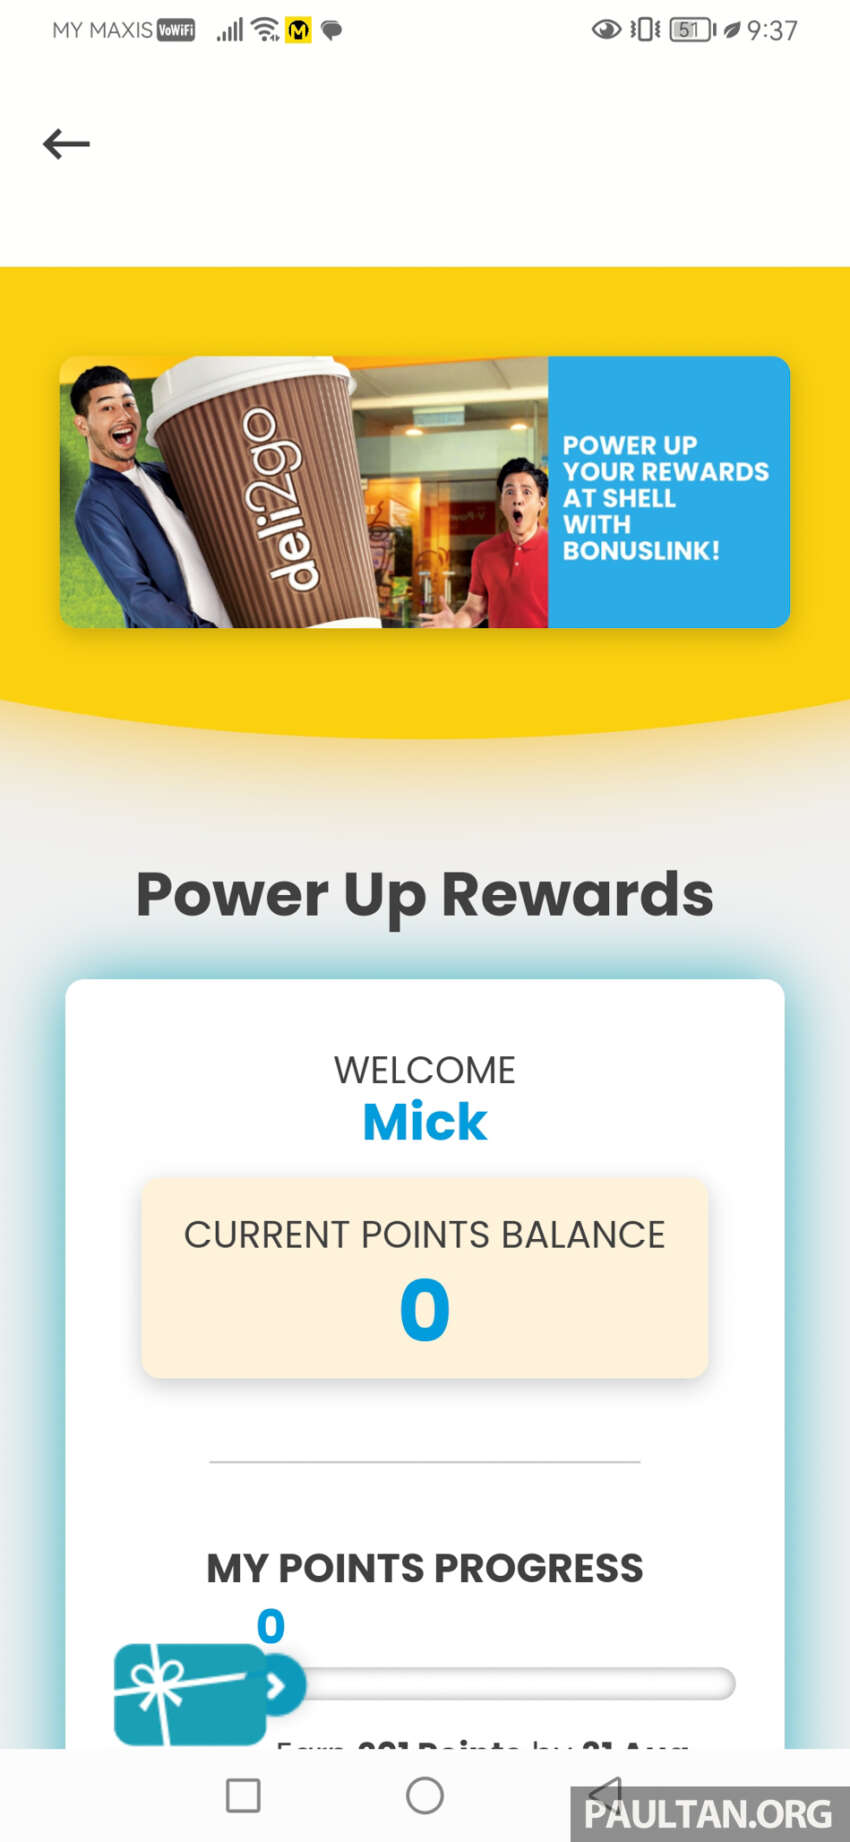 Shell Asia mobile app now online in Malaysia – pay for fuel, collect rewards points, integrated with BonusLink 1650611